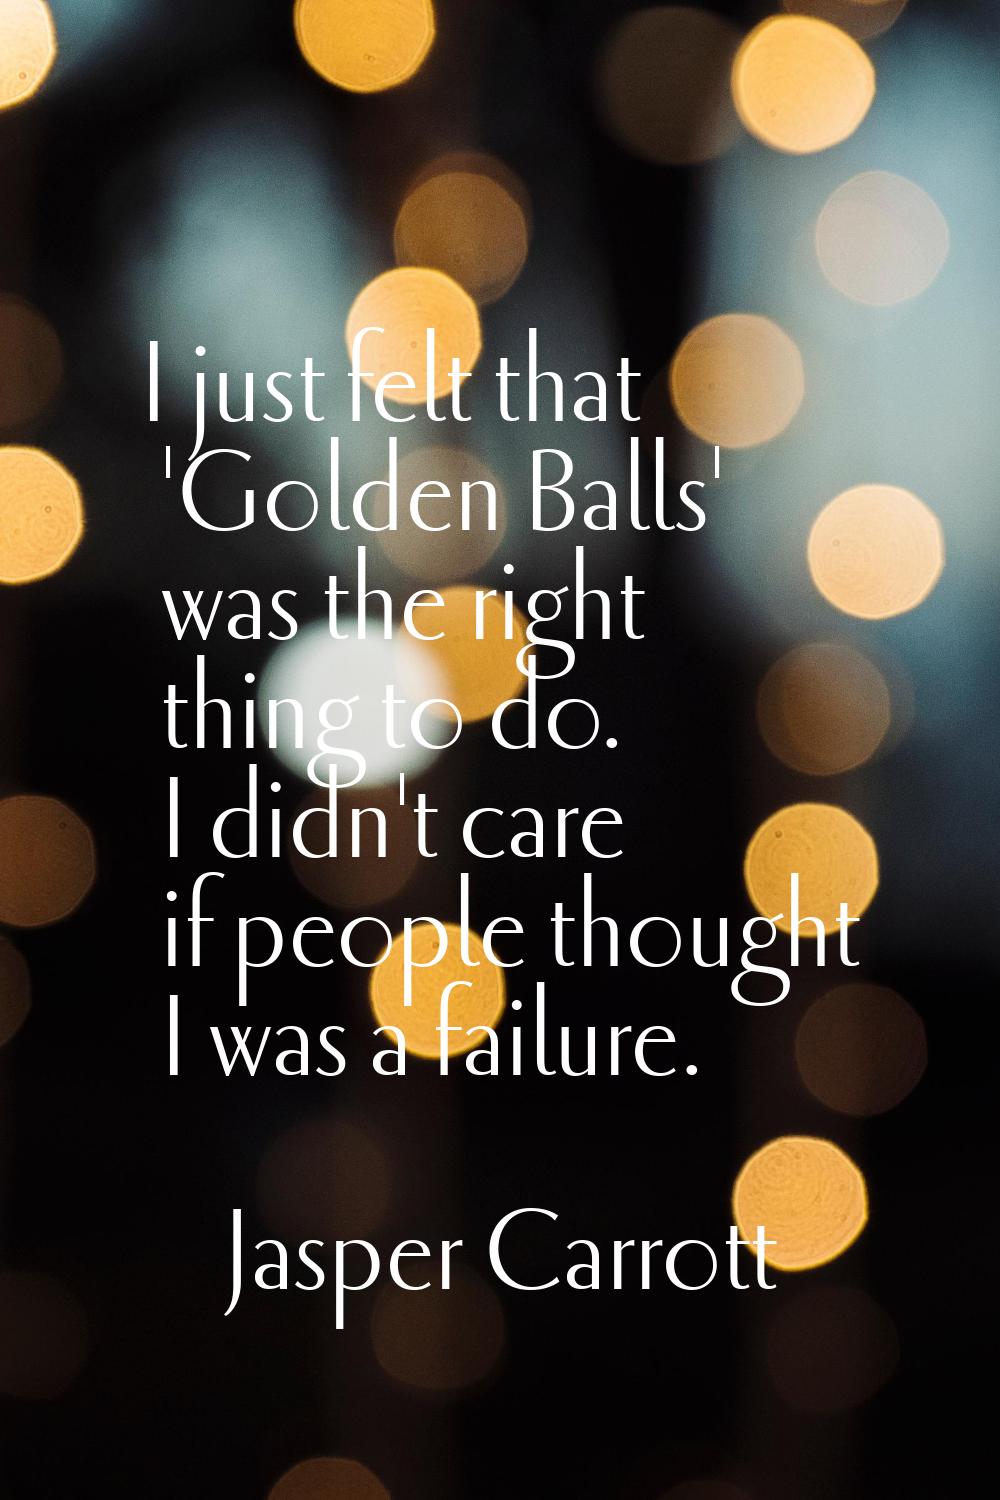 I just felt that 'Golden Balls' was the right thing to do. I didn't care if people thought I was a 